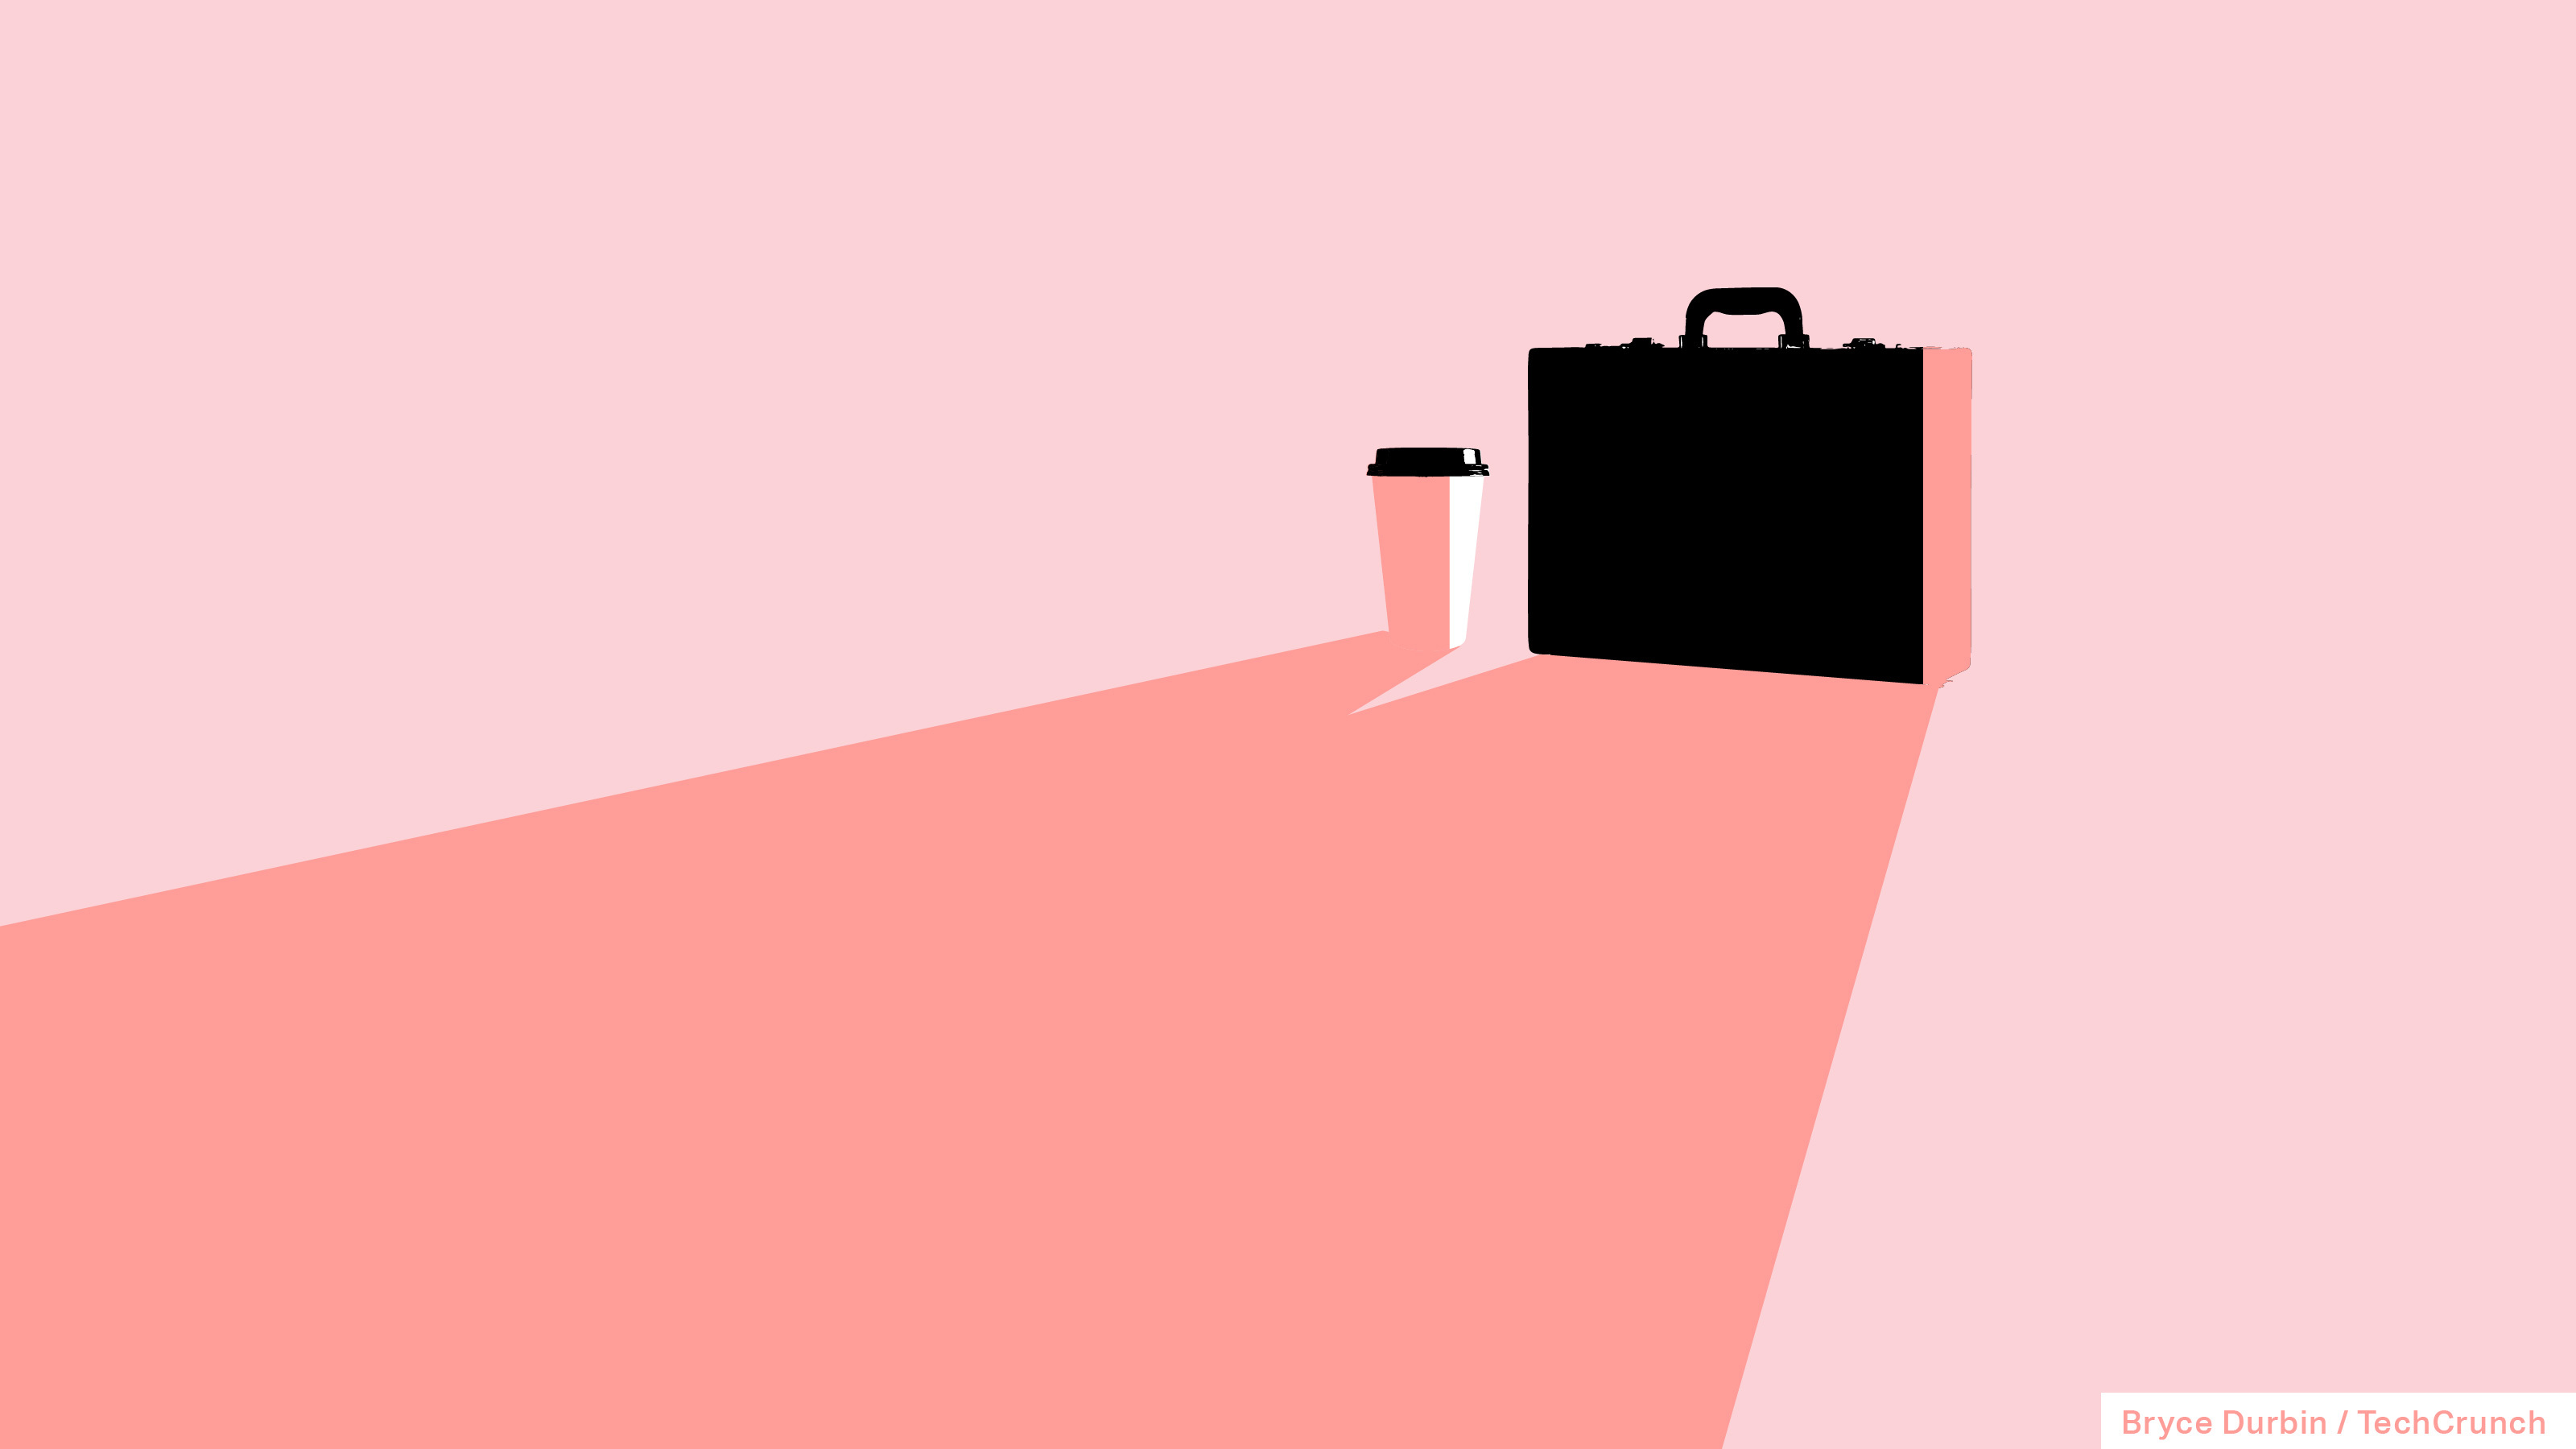 A cup of coffee and a briefcase in millennial pink to illustrate the rise of the "boss" term.